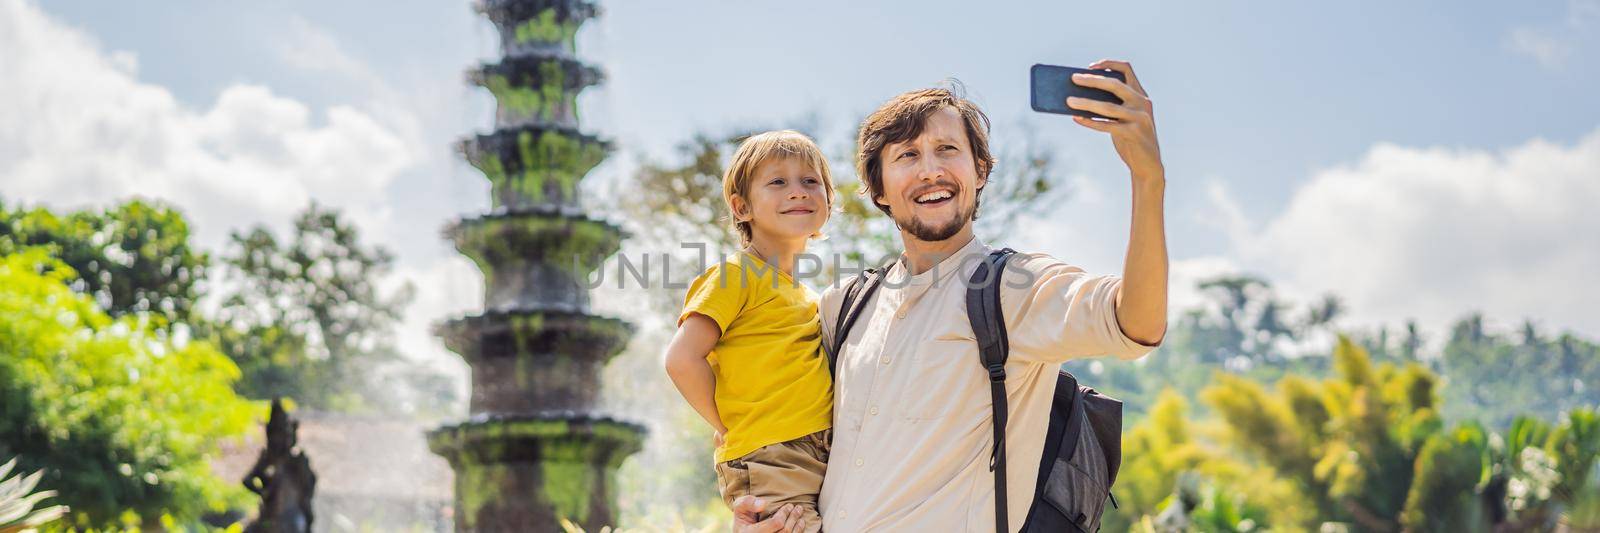 Dad and son tourists in Taman Tirtagangga, Water palace, Water park, Bali Indonesia. Honeymoon in Bali. Traveling with children concept. Kids friendly place. BANNER, LONG FORMAT